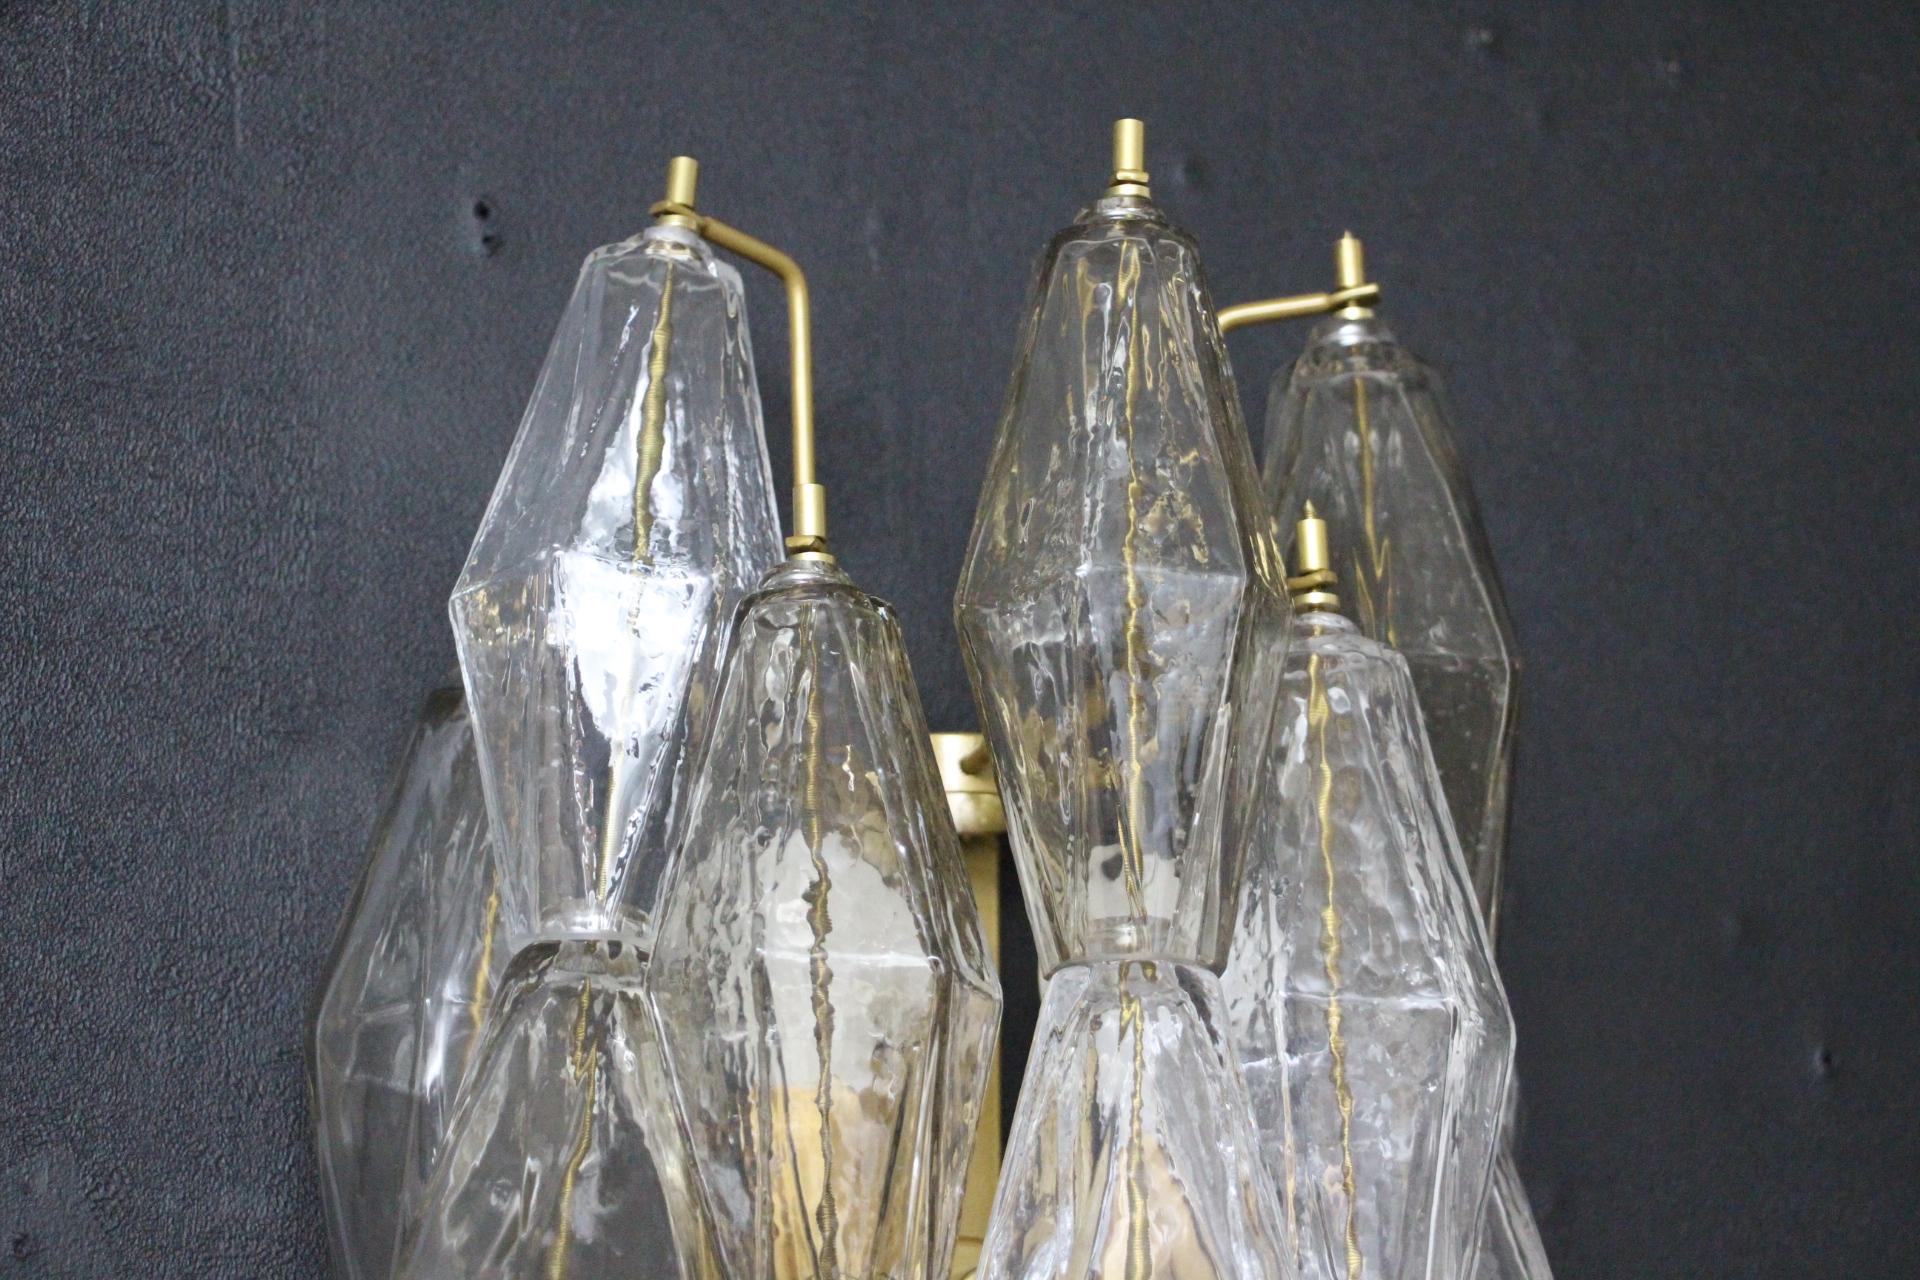 Pair of Polyhedral Sconces in Clear and Smoked Murano Glass, Venini Style 1